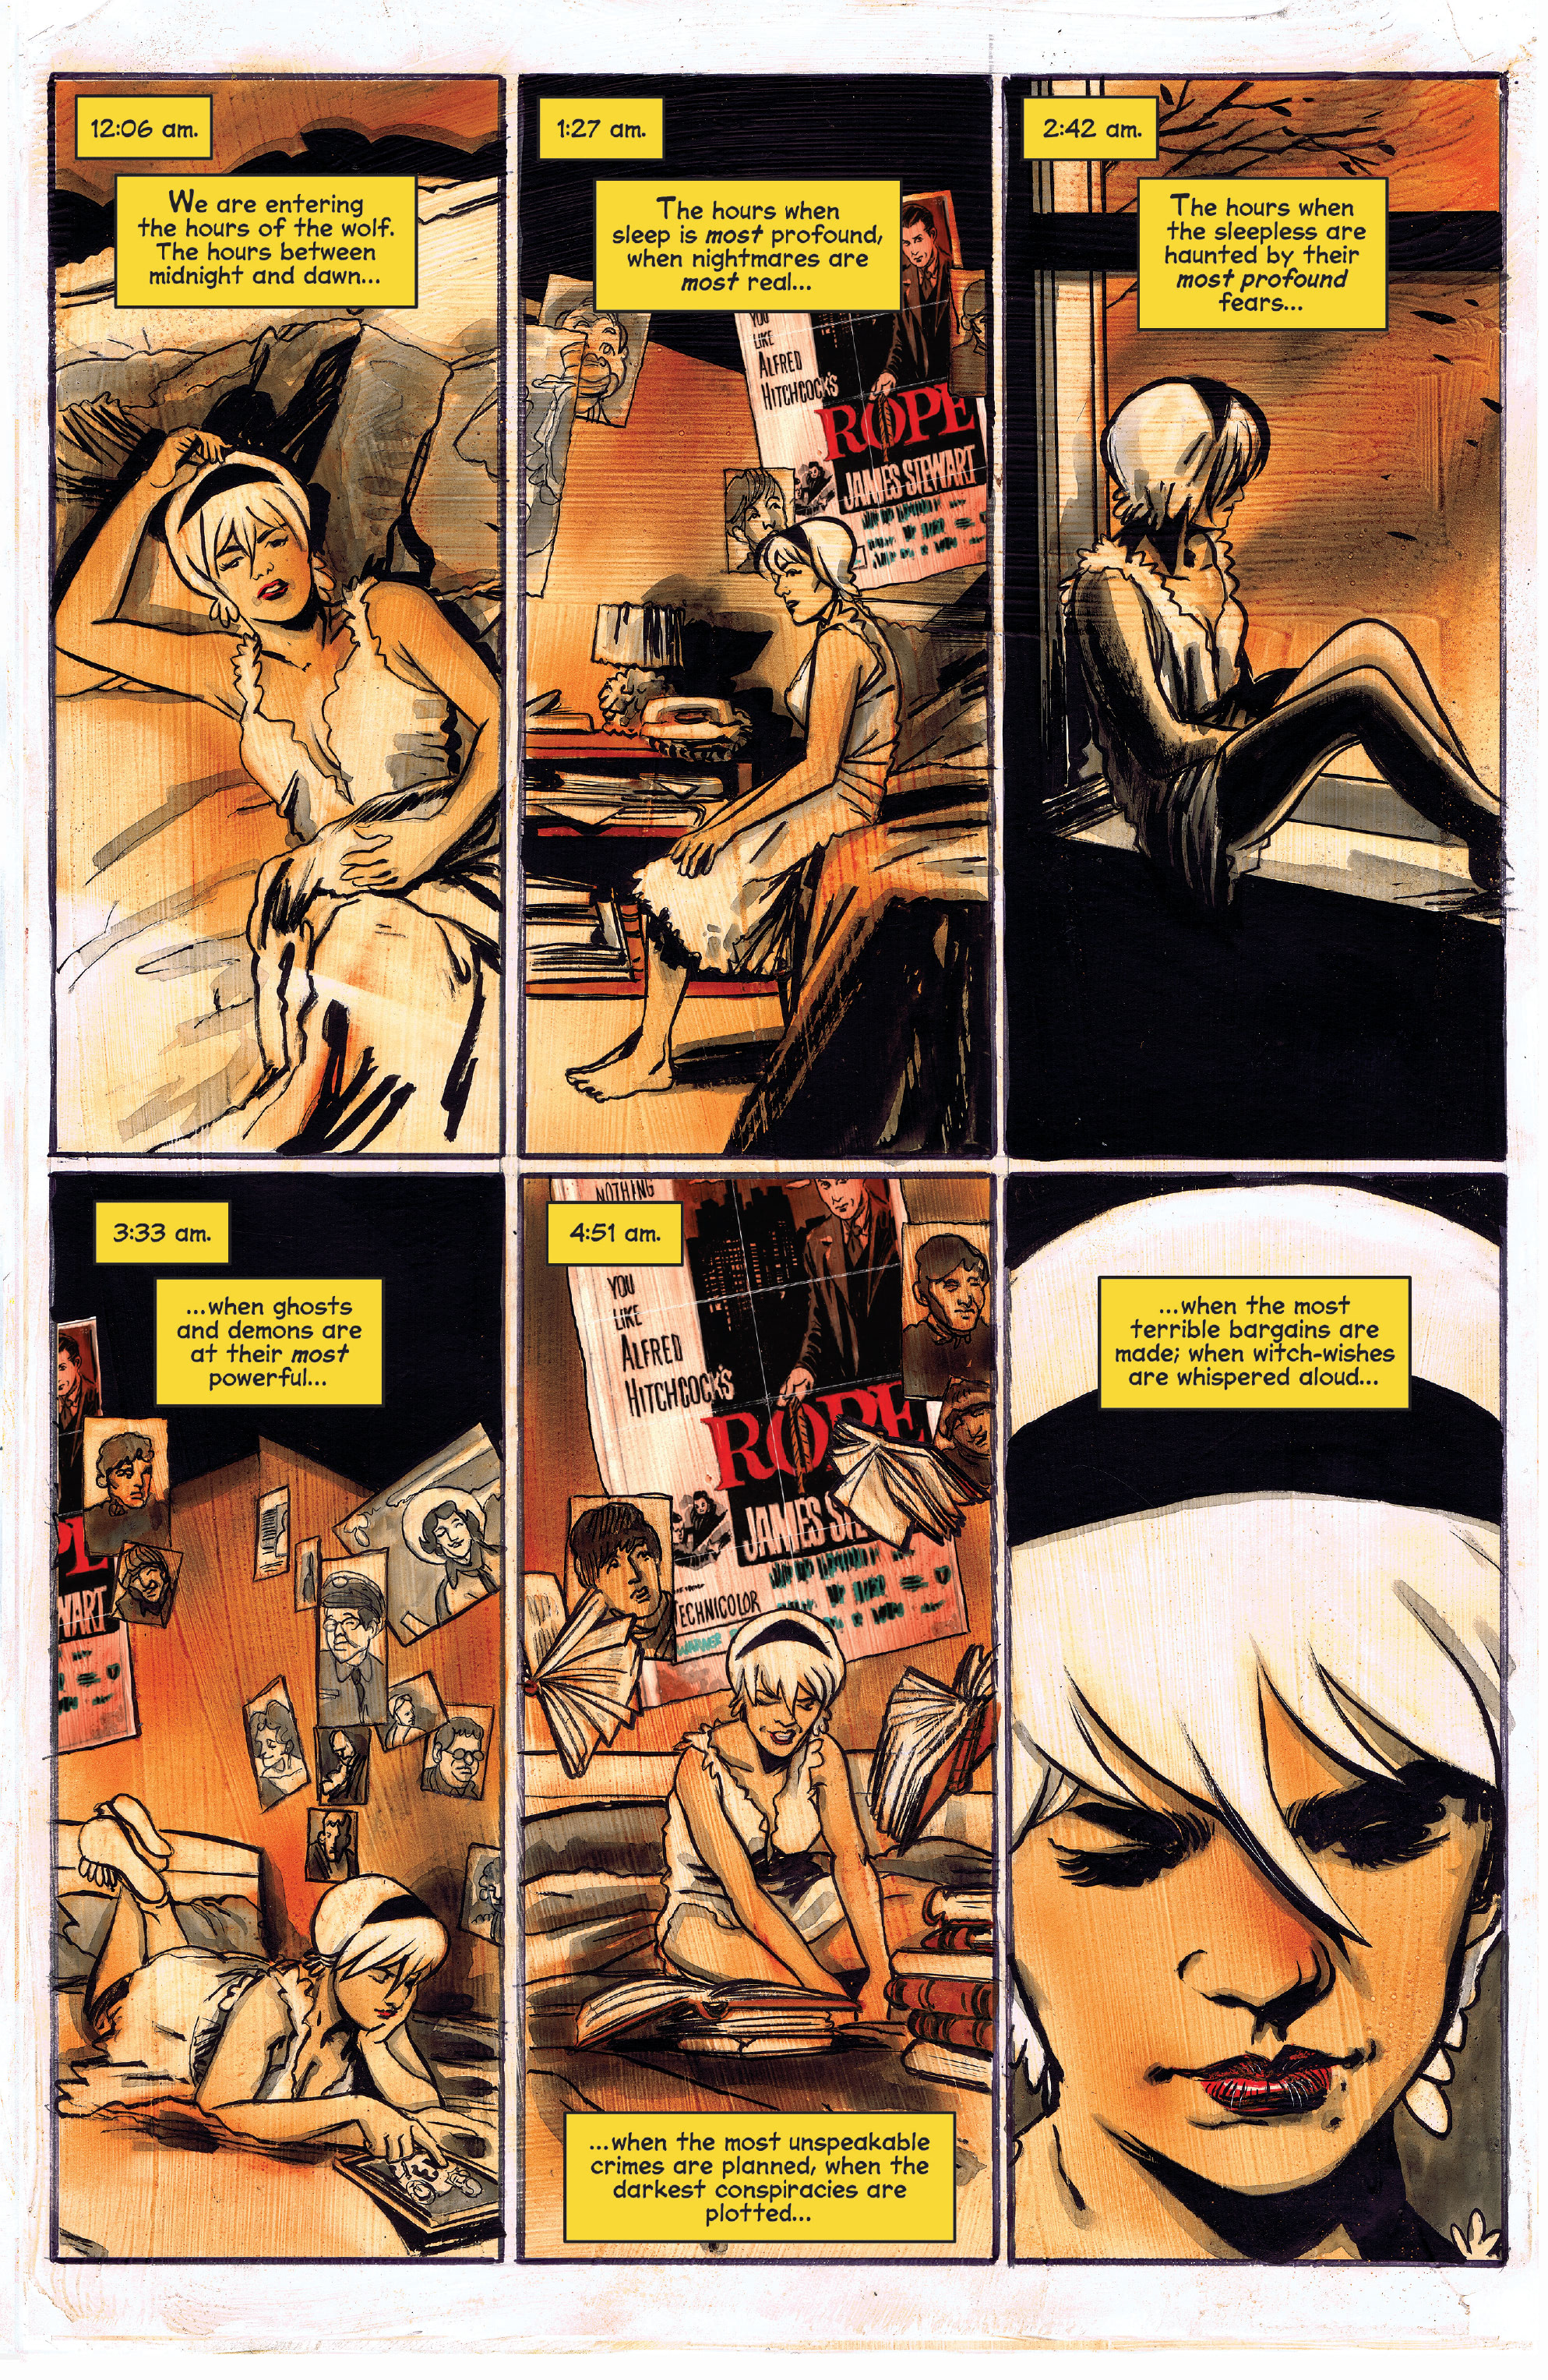 Chilling Adventures of Sabrina  (2014-): Chapter 9 - Page 4